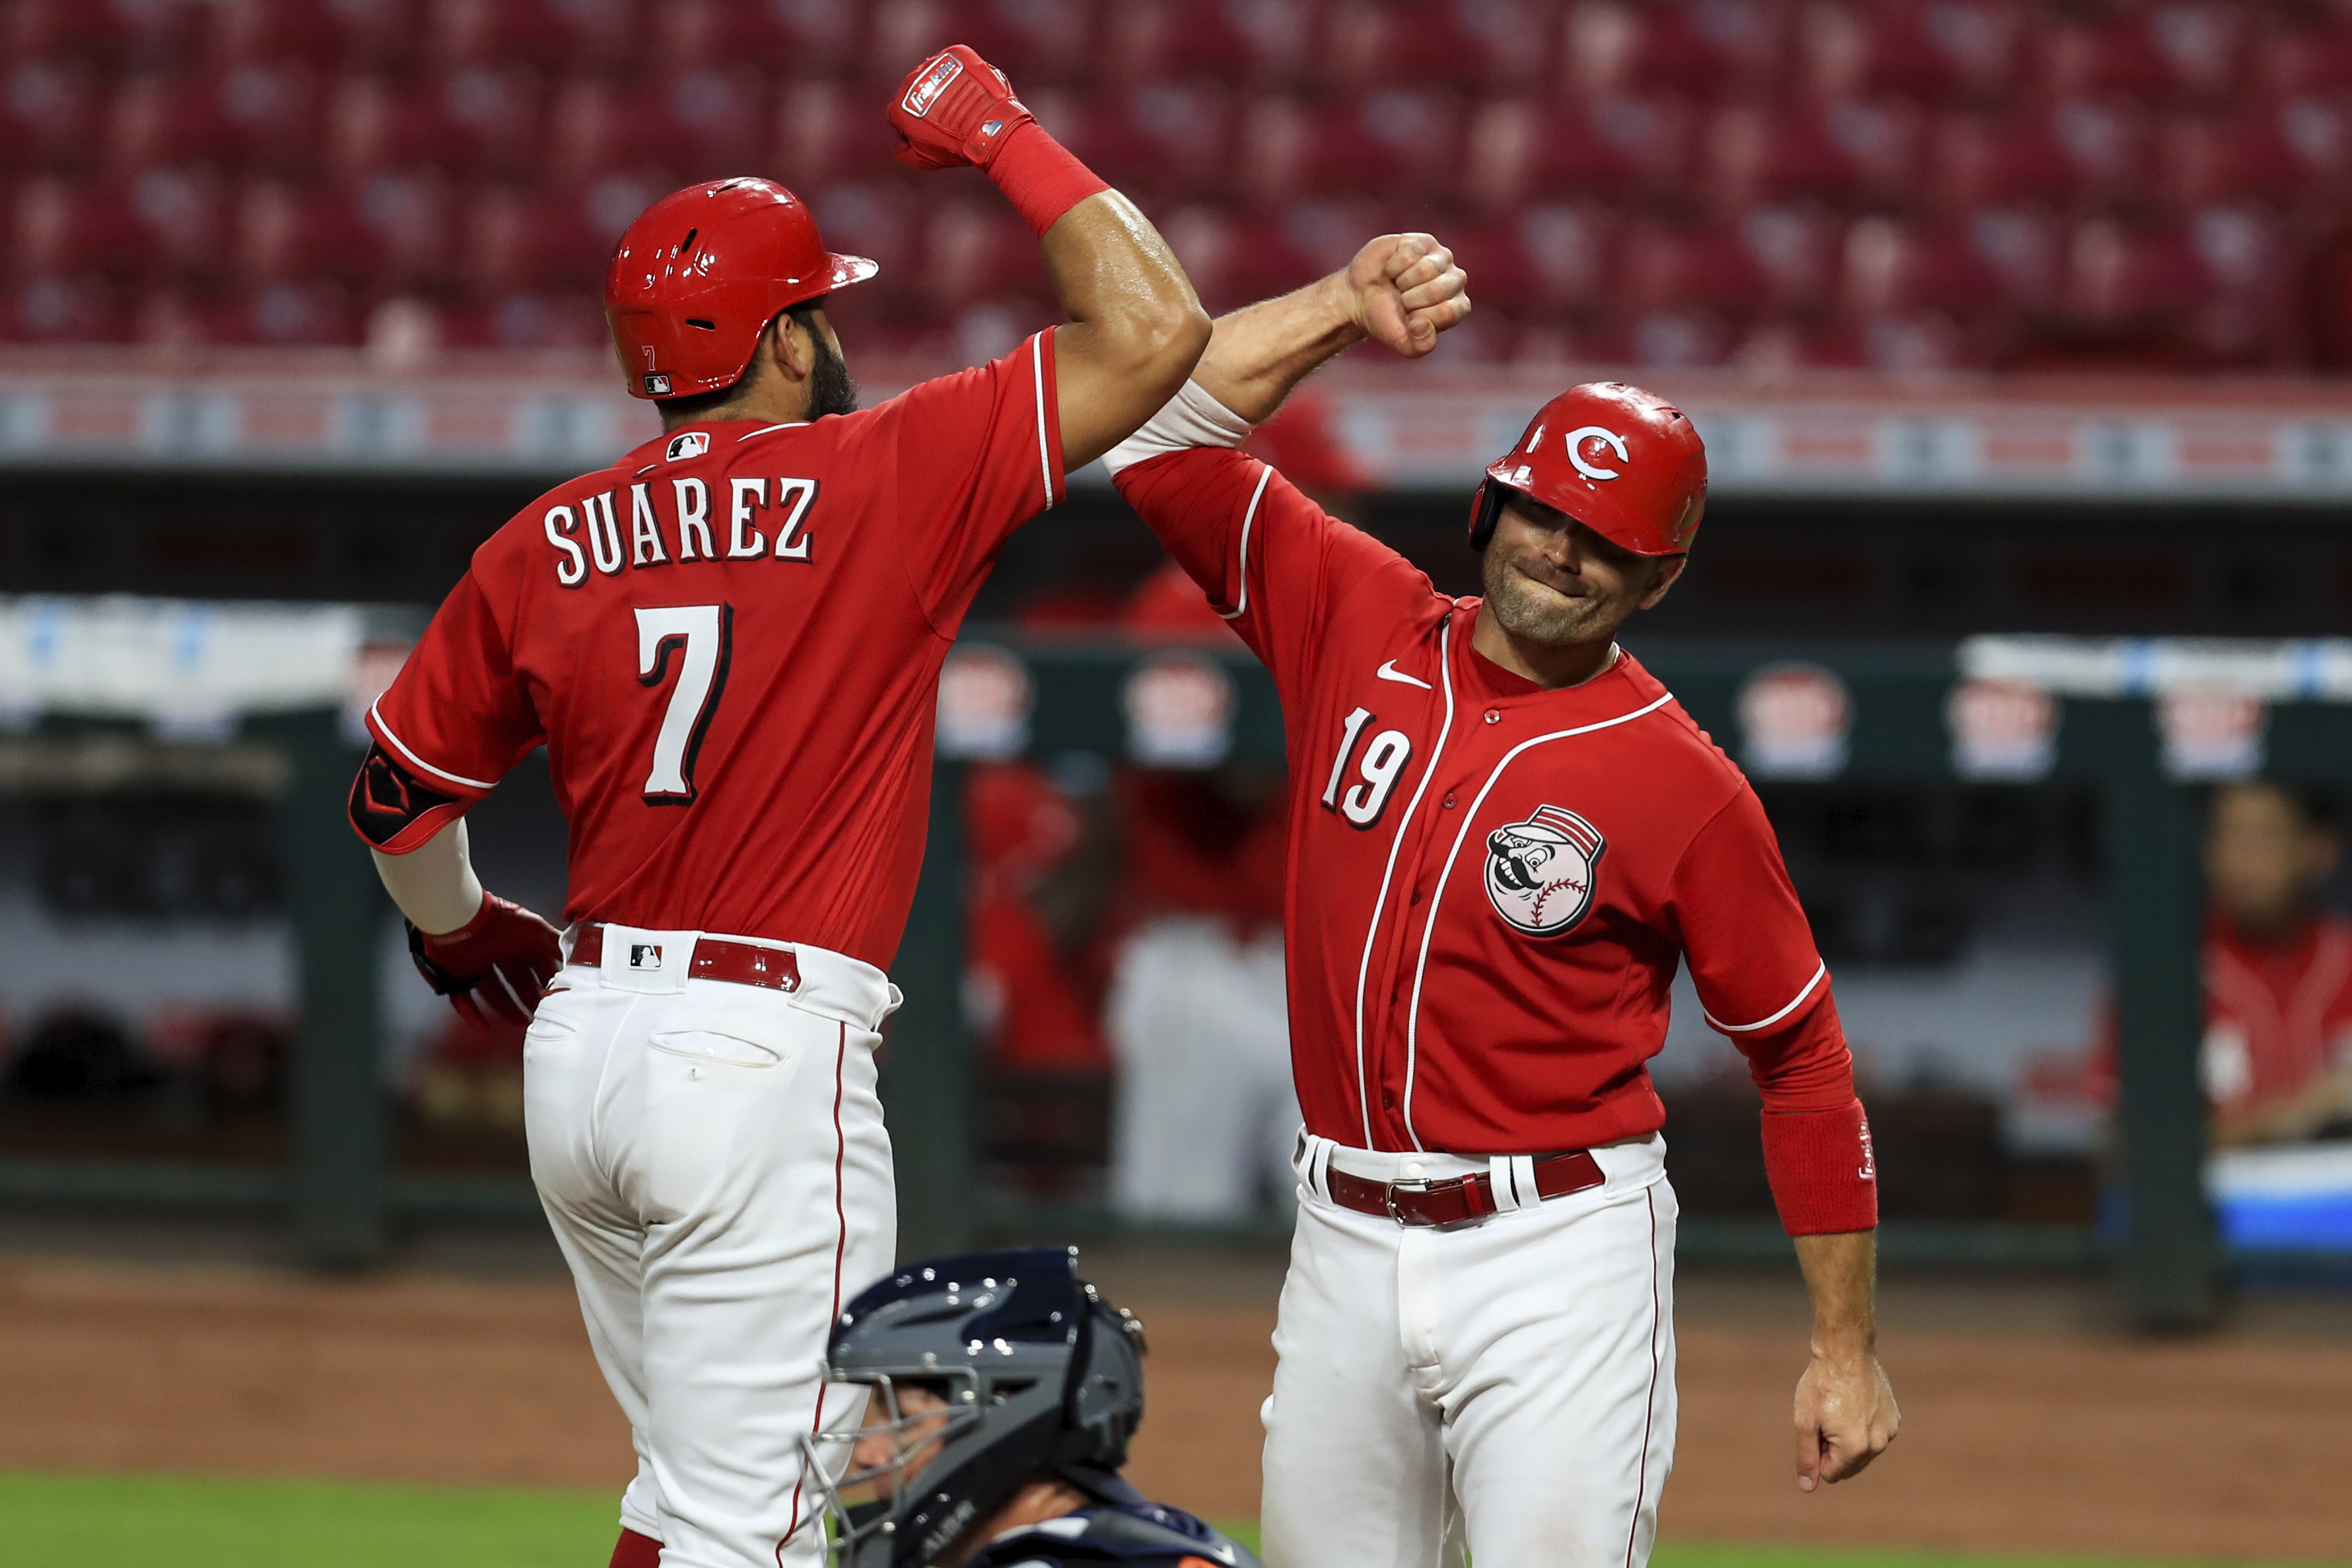 Though Season Is Short, Optimism High For Reds | WVXU